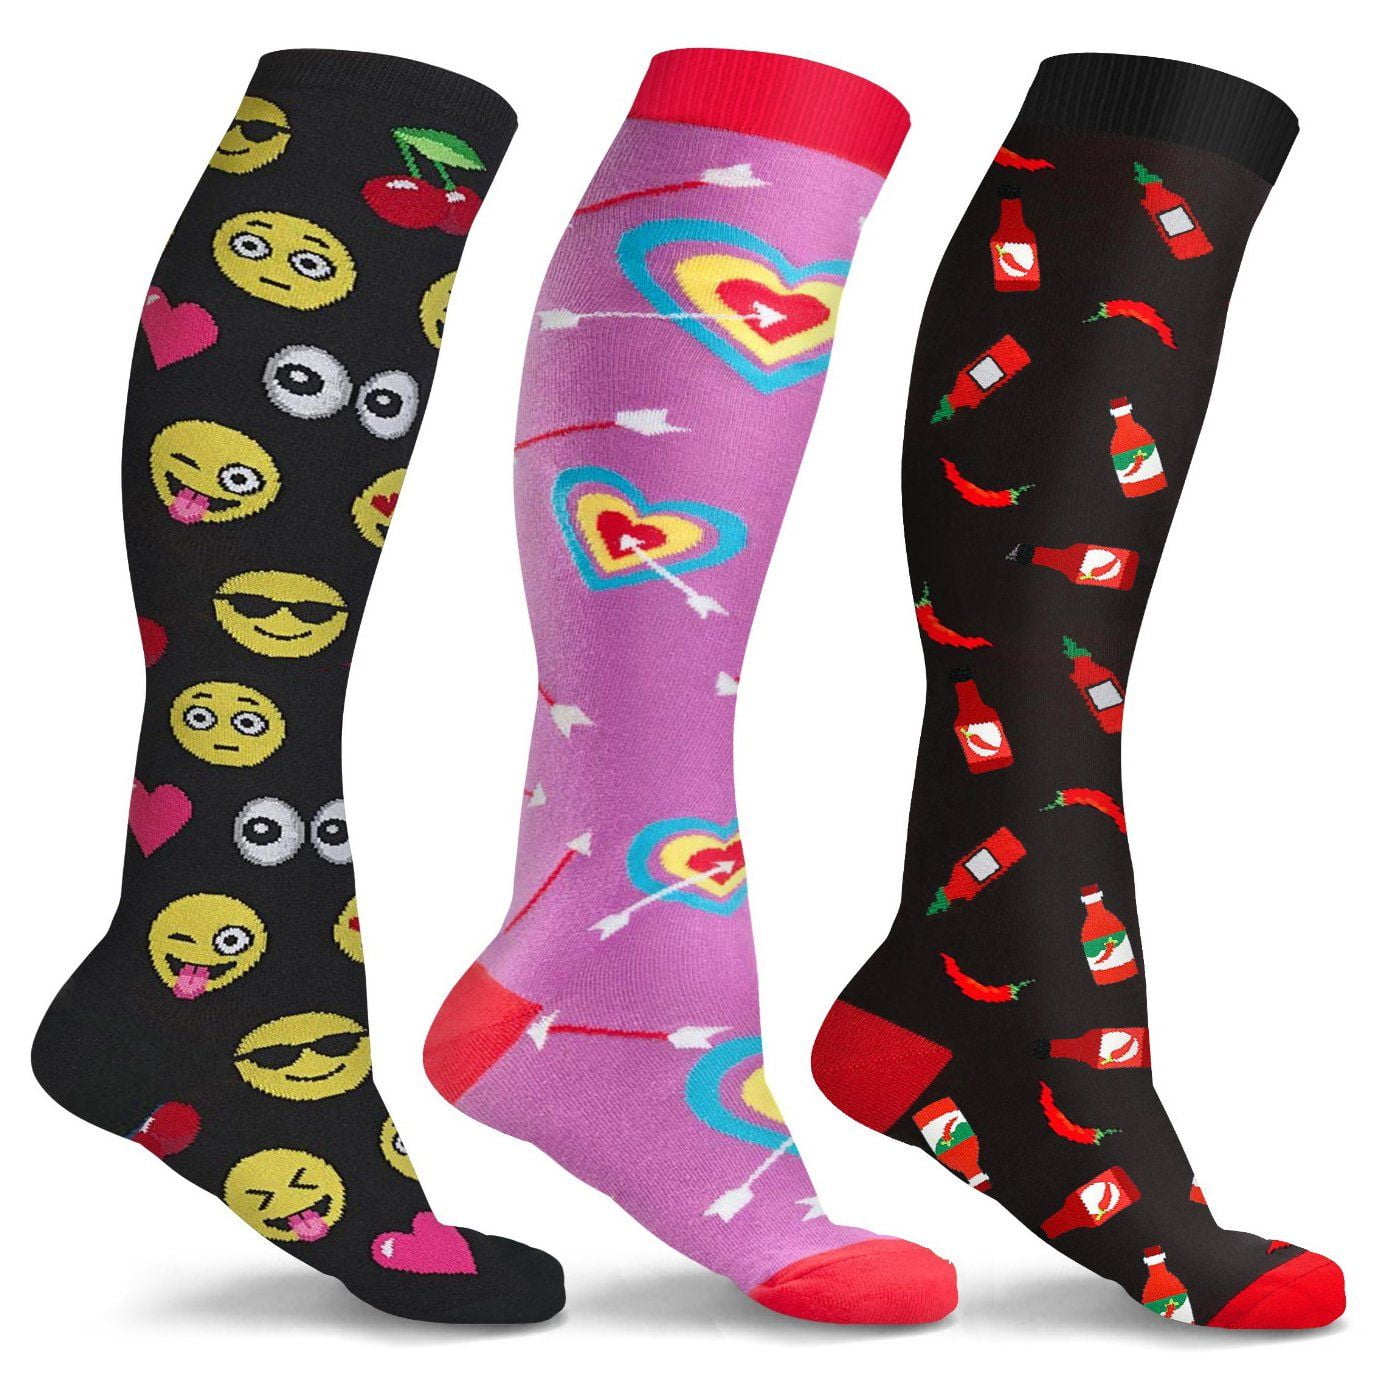 3-Pairs: DCF Unisex Fun and Patterned Knee-High Compression Socks ...